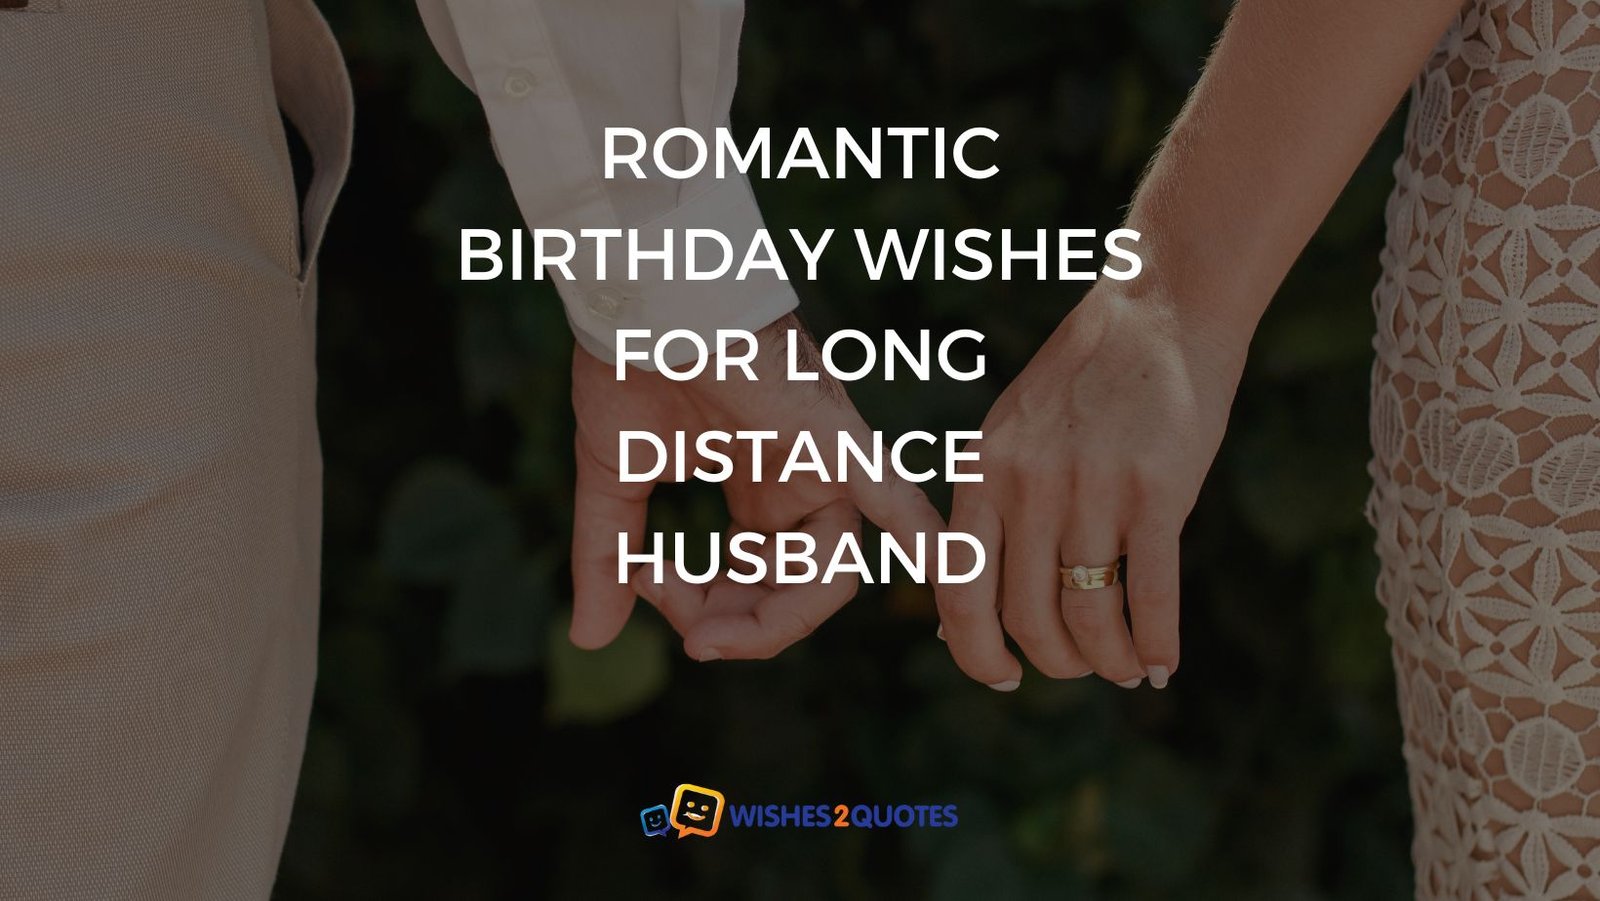 Romantic Birthday Wishes for Long Distance Husband